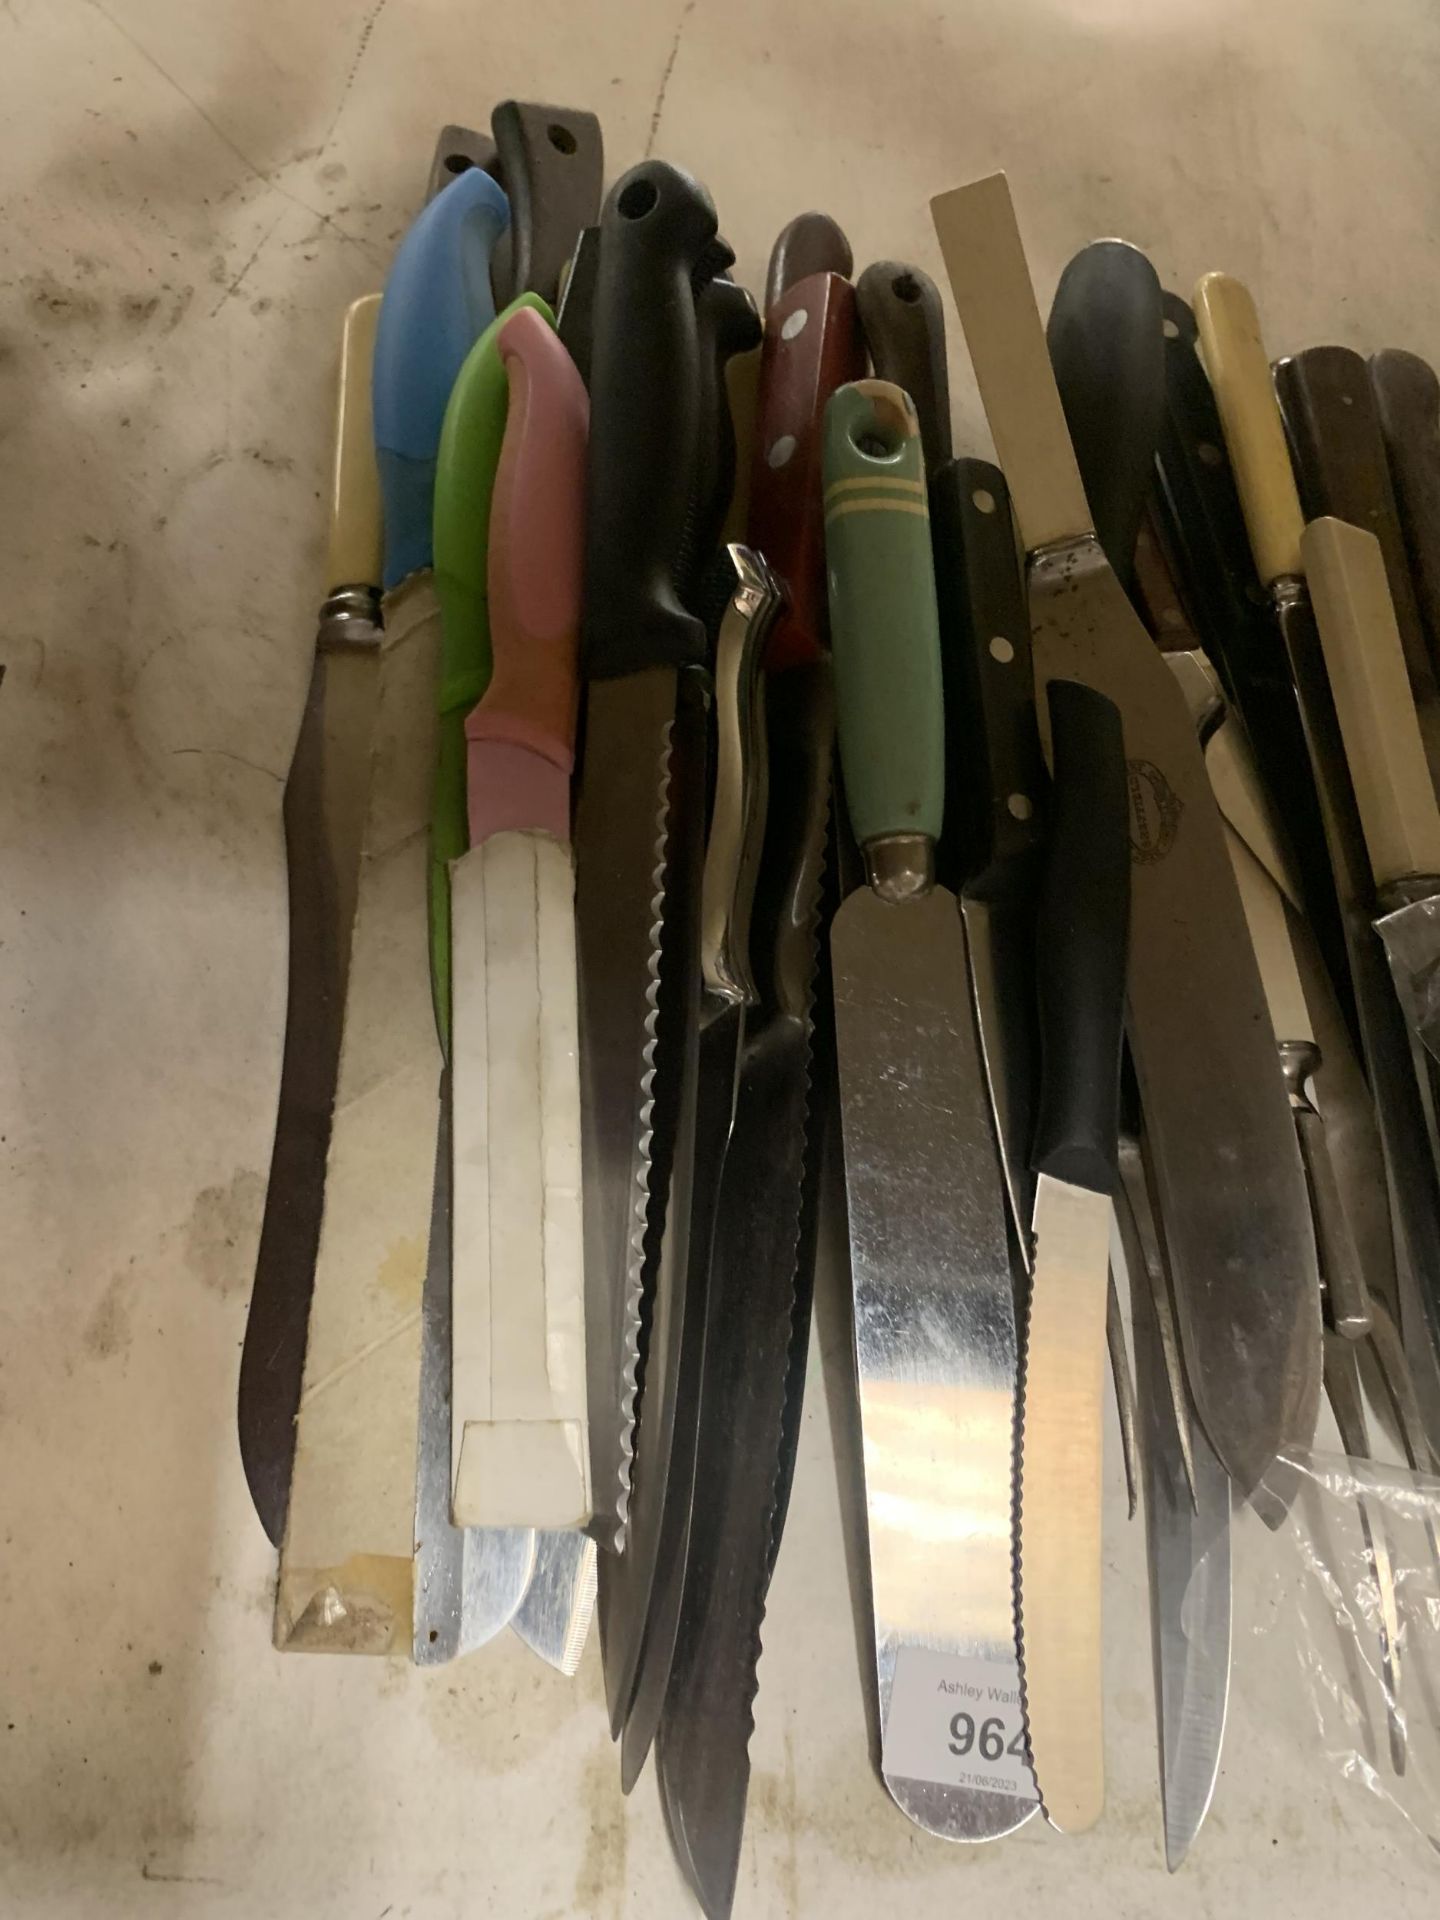 A QUANTITY OF CARVING KNIVES, BREAD KNIVES, SHARPENING STEELS, CARVING FORKS, ETC - Image 2 of 3